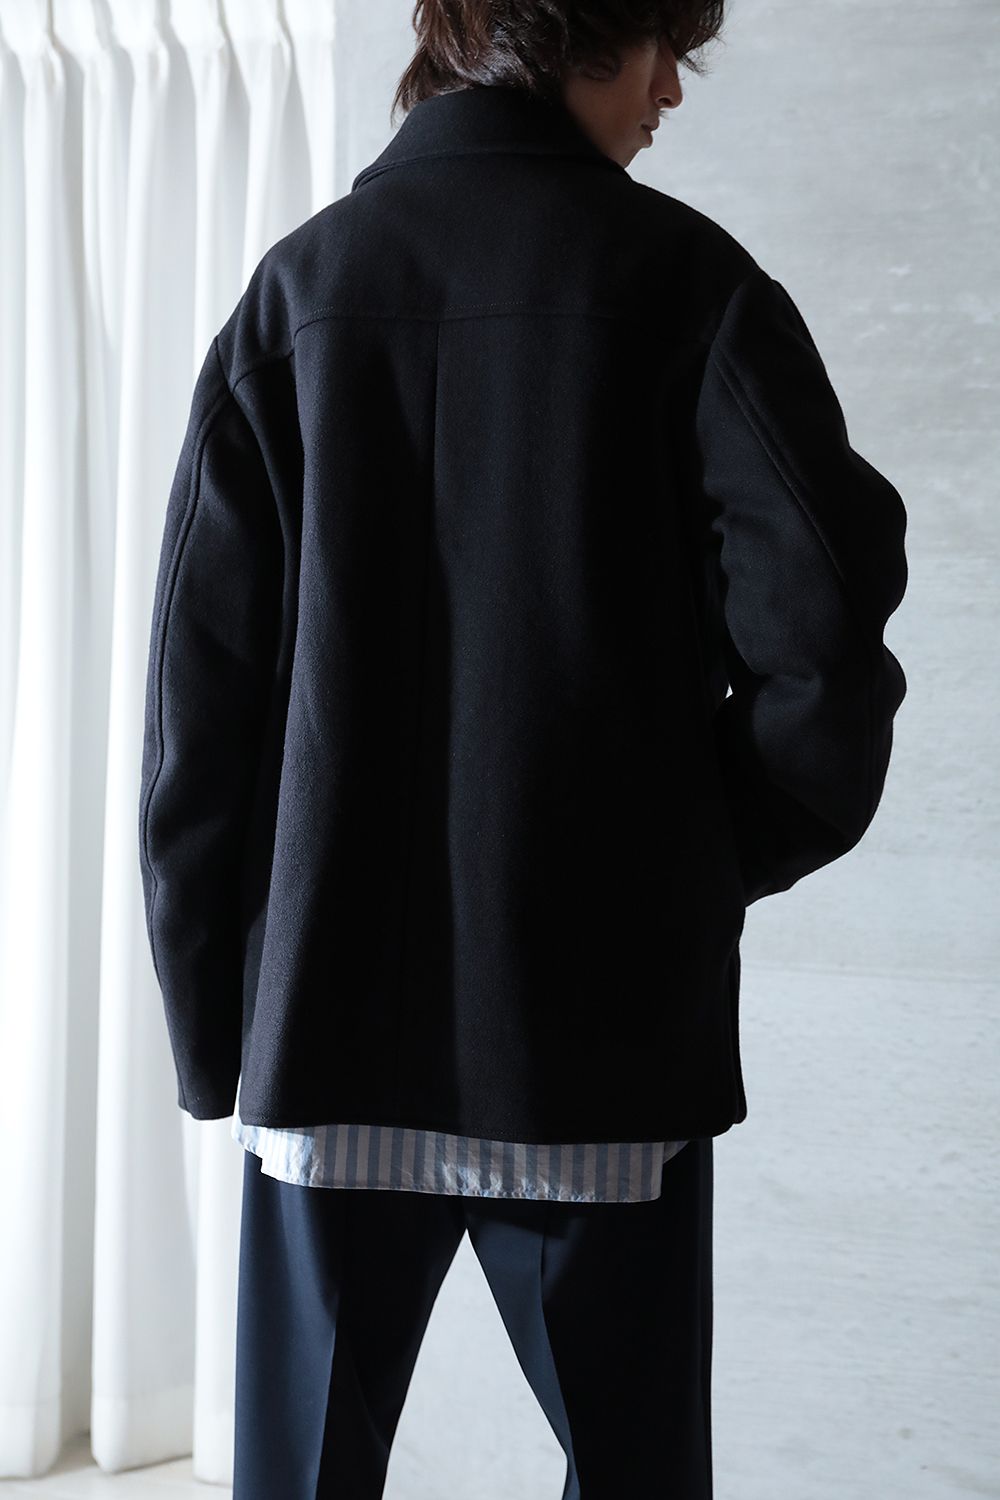 DRIES VAN NOTEN】23AW COLLECTION - LAST DELIVERY | Acacia ONLINESTORE